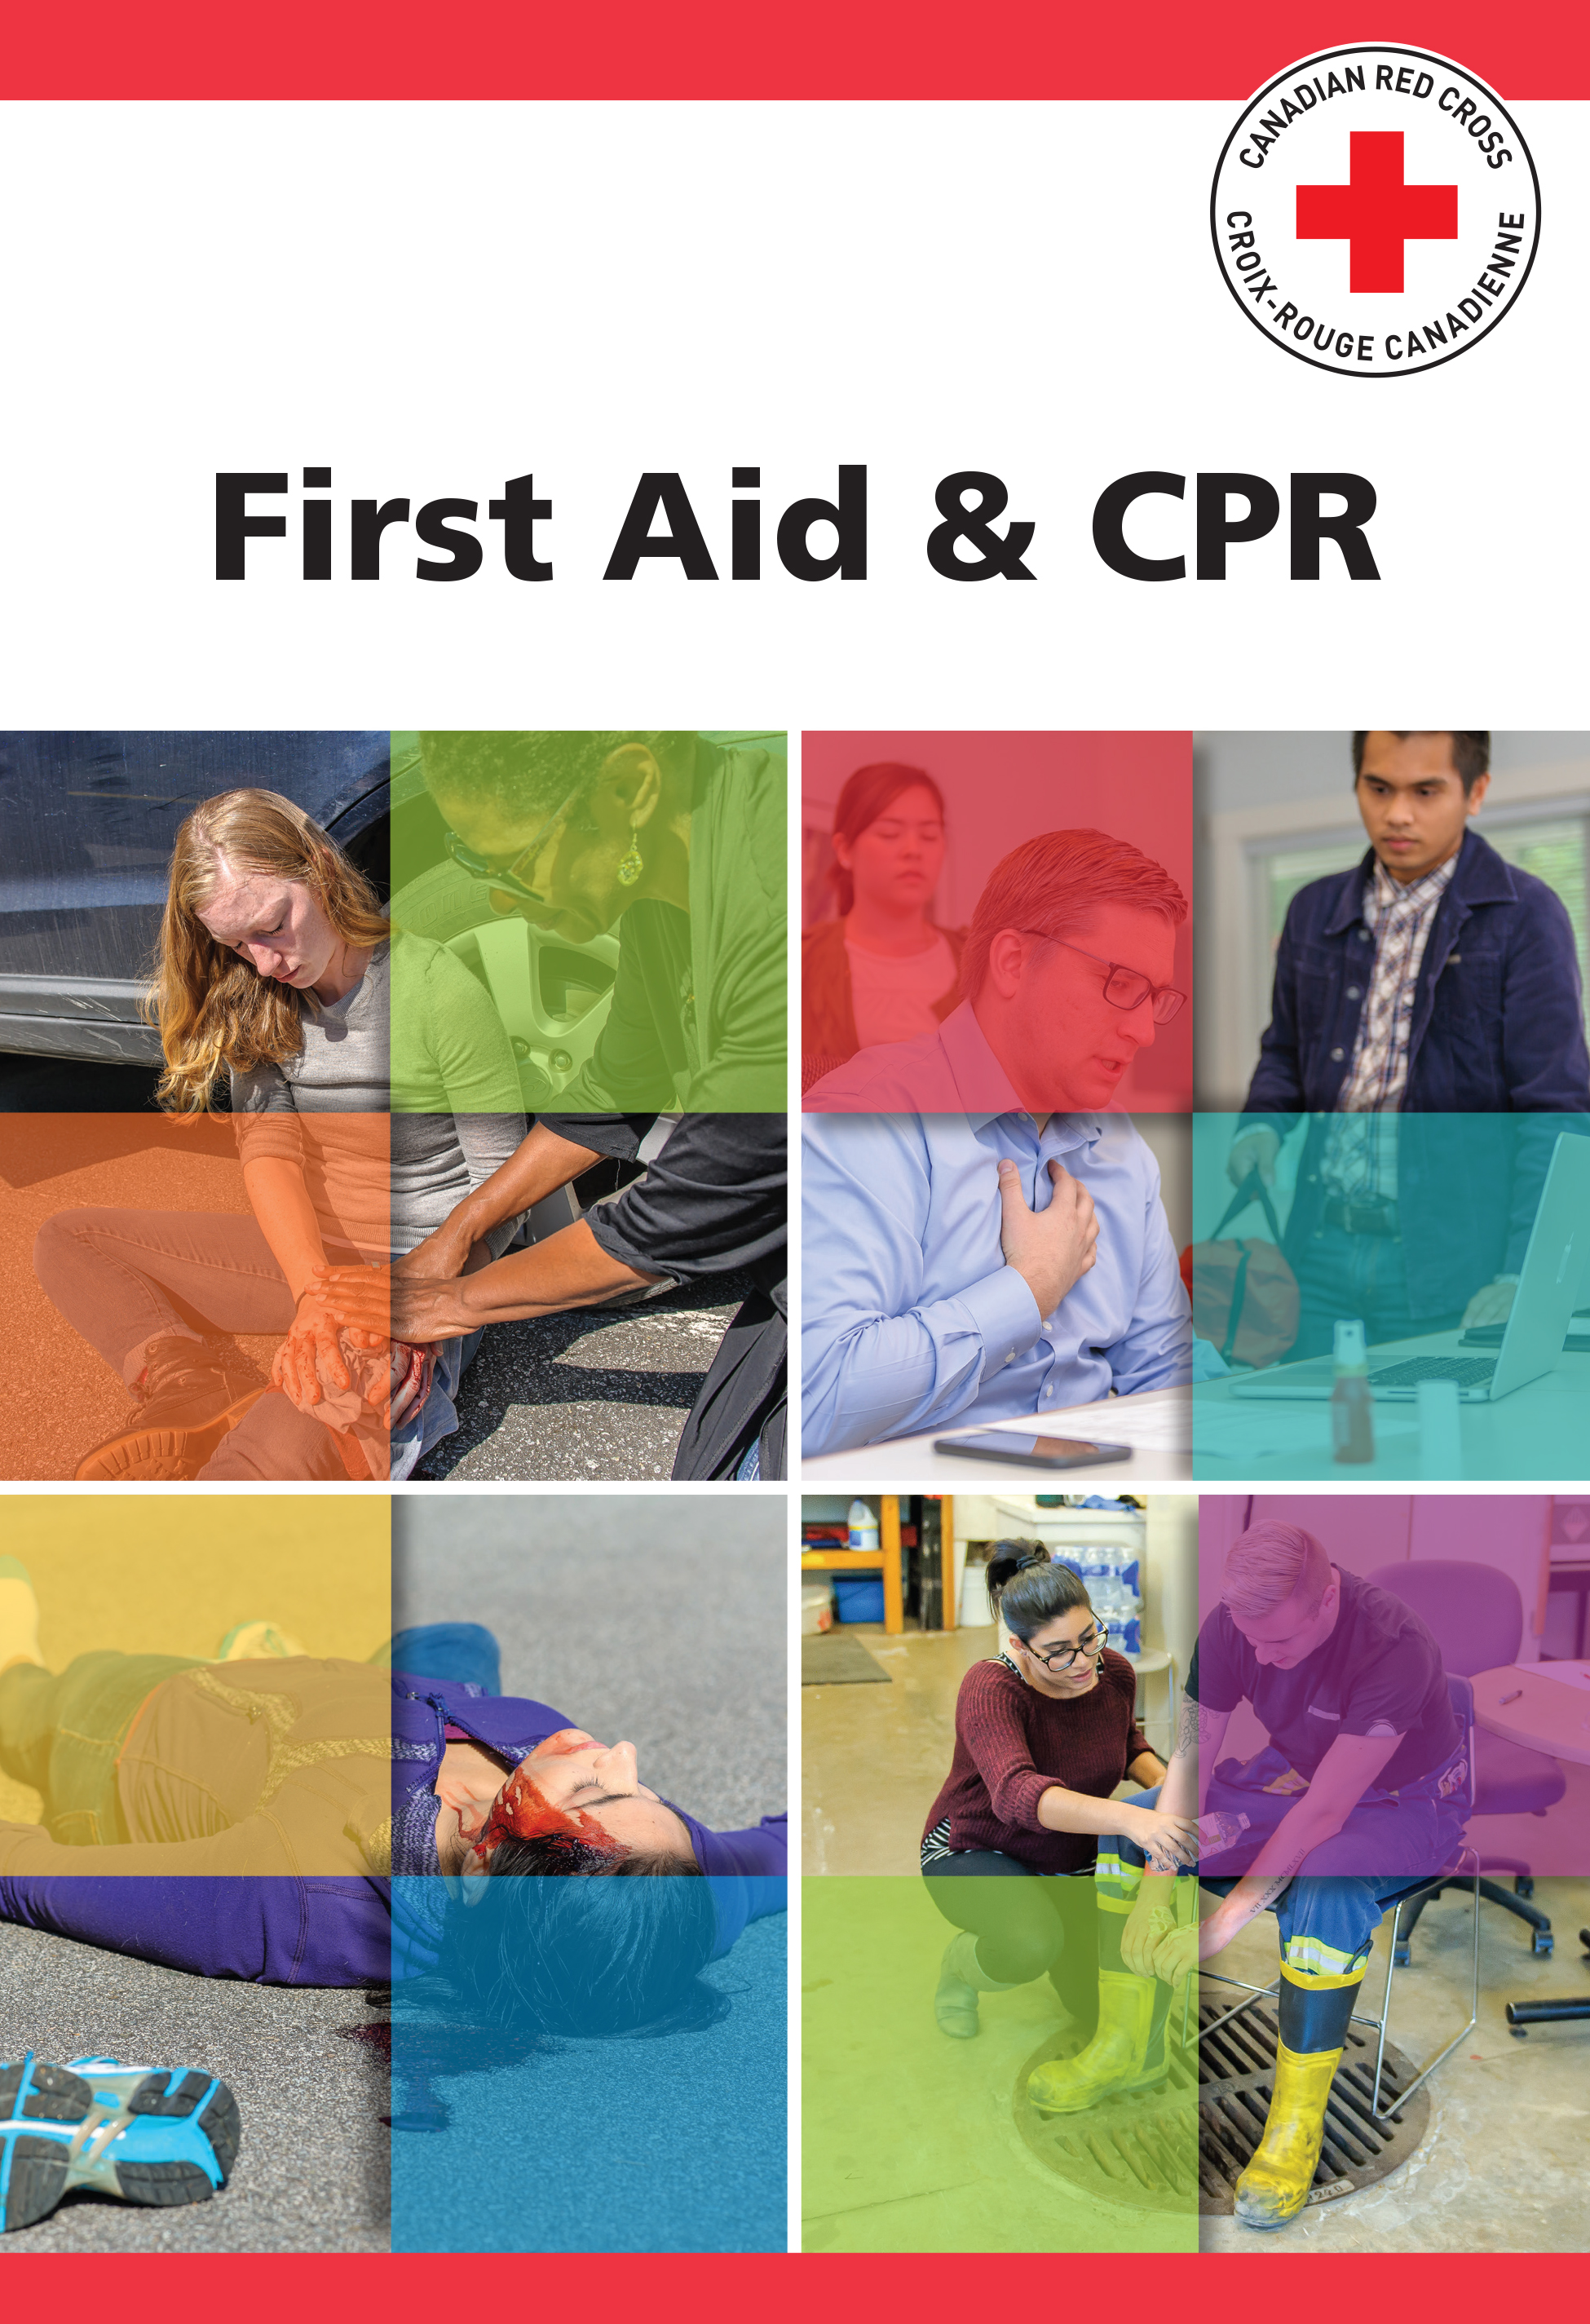 First Aid Course Materials for Marine Basic First Aid Course - CPR (Blended) in Duncan